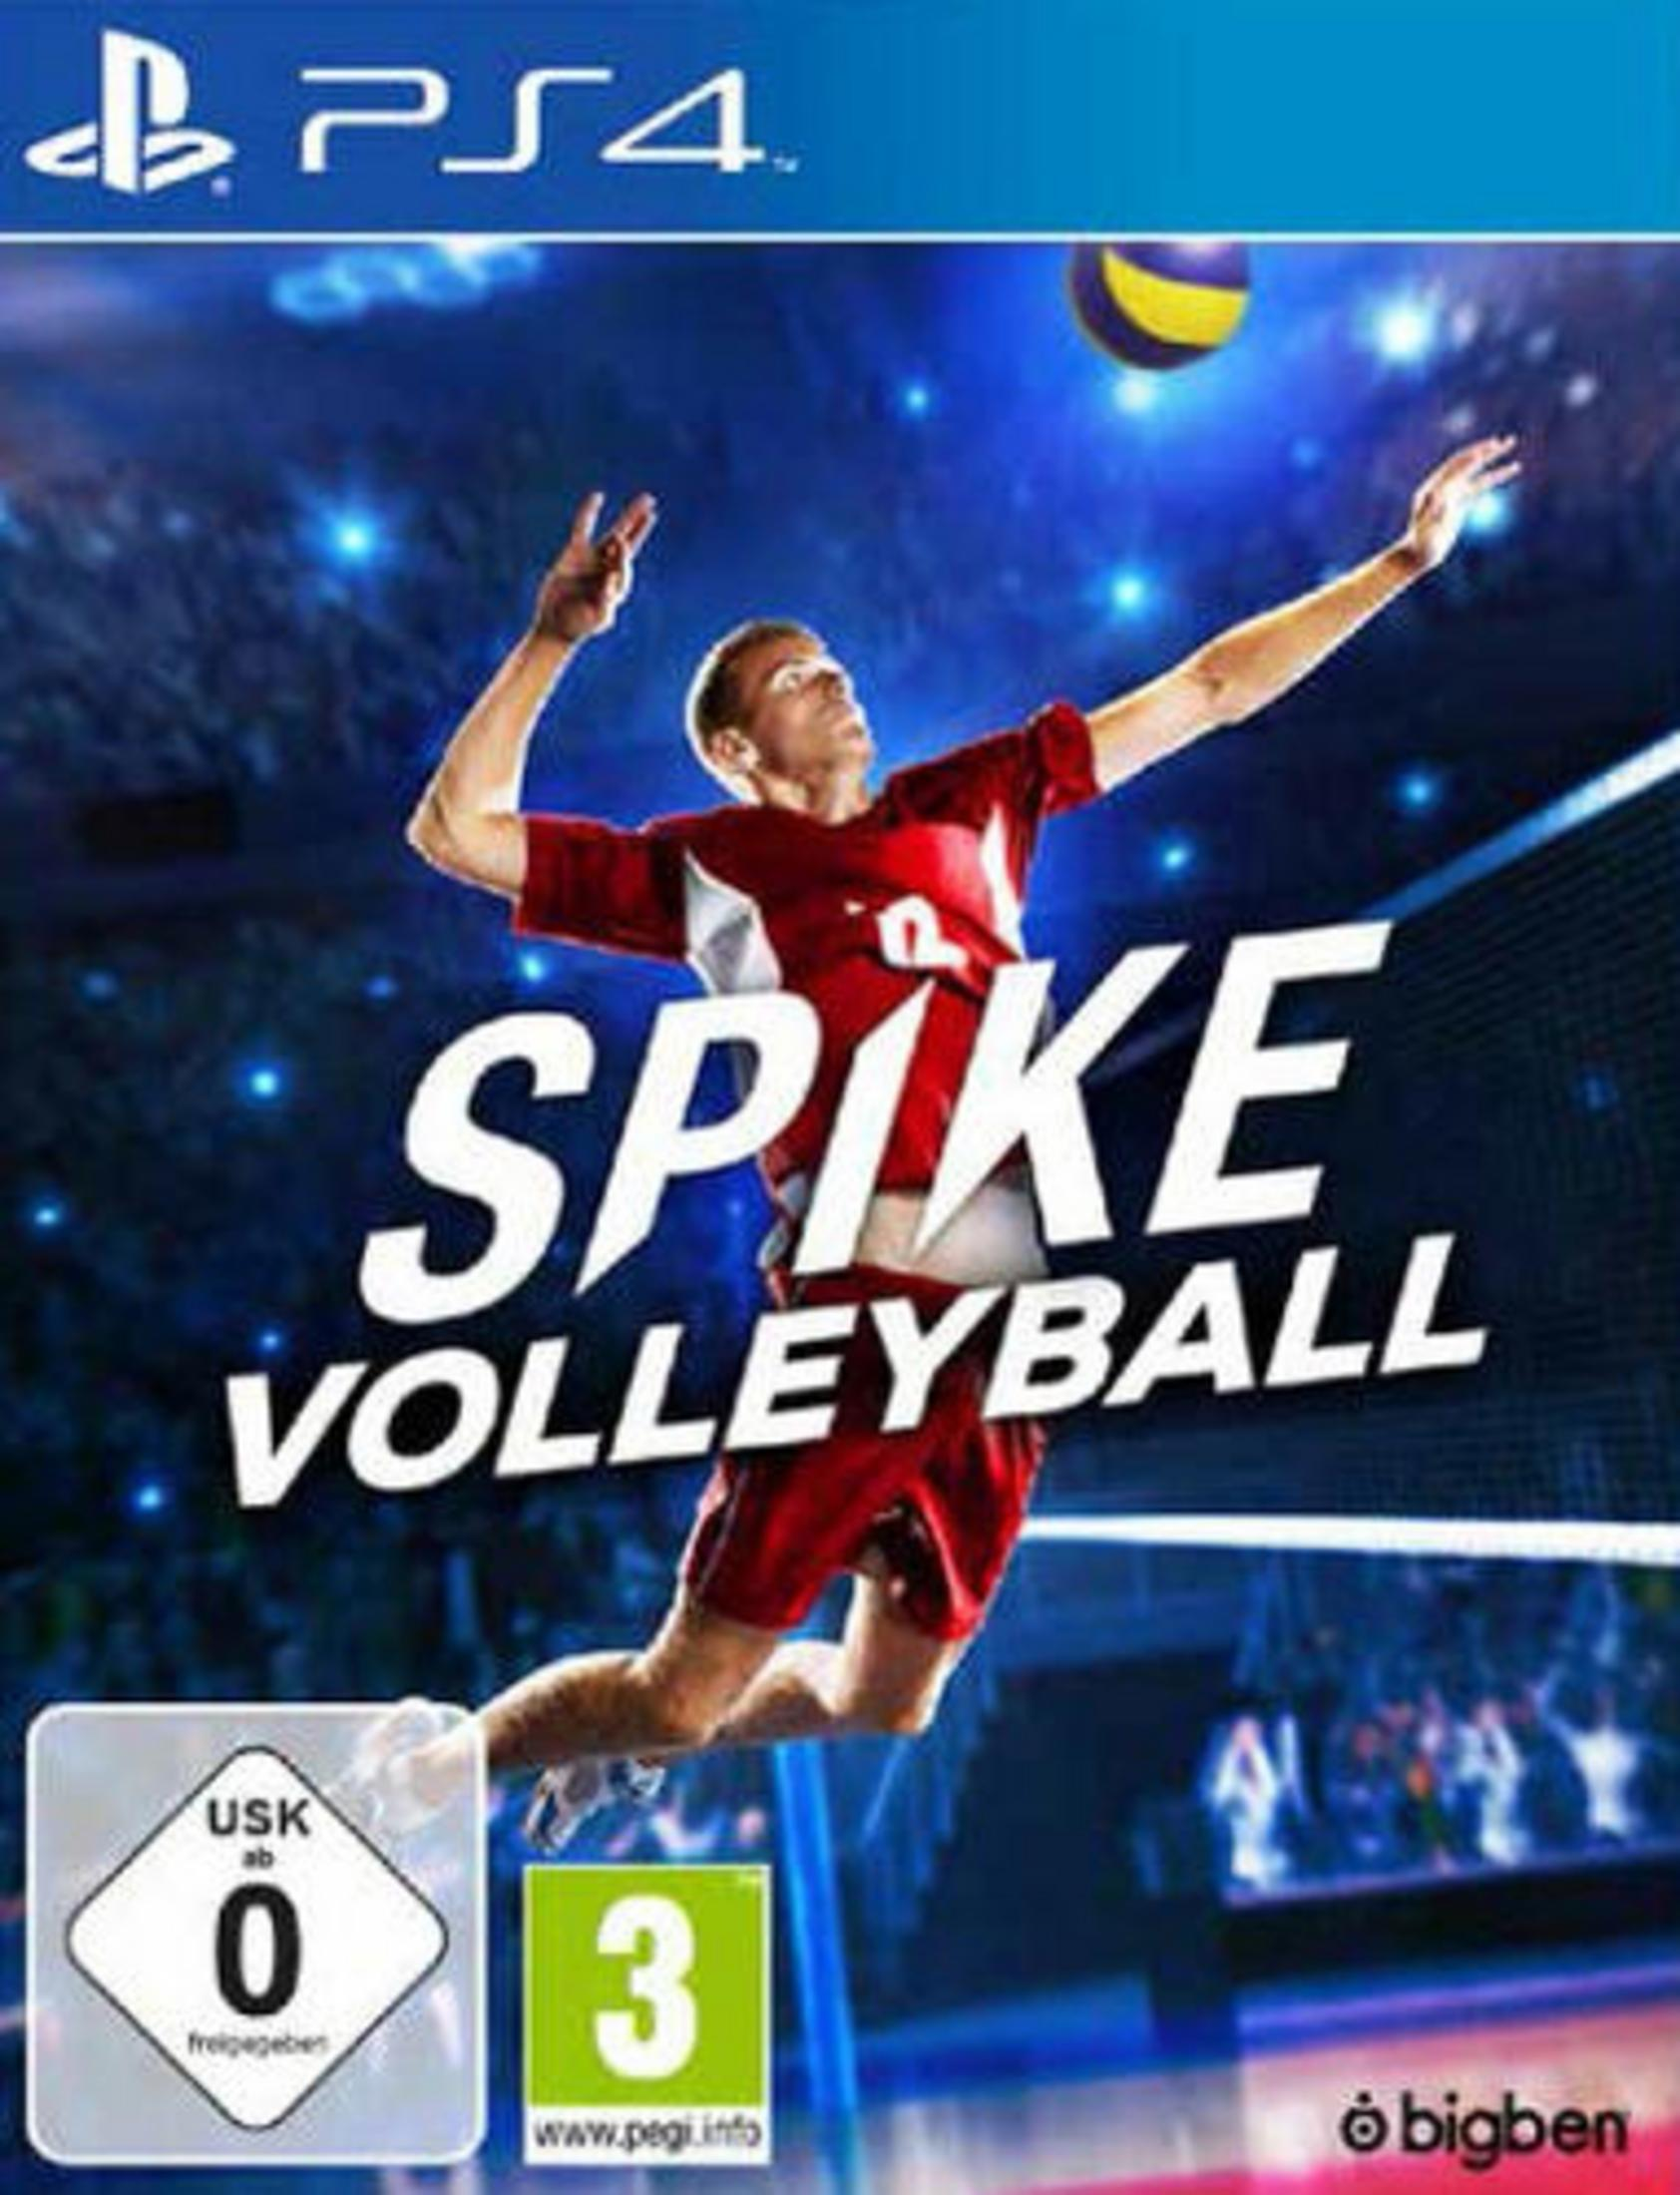 4] [PlayStation Volleyball Spike -